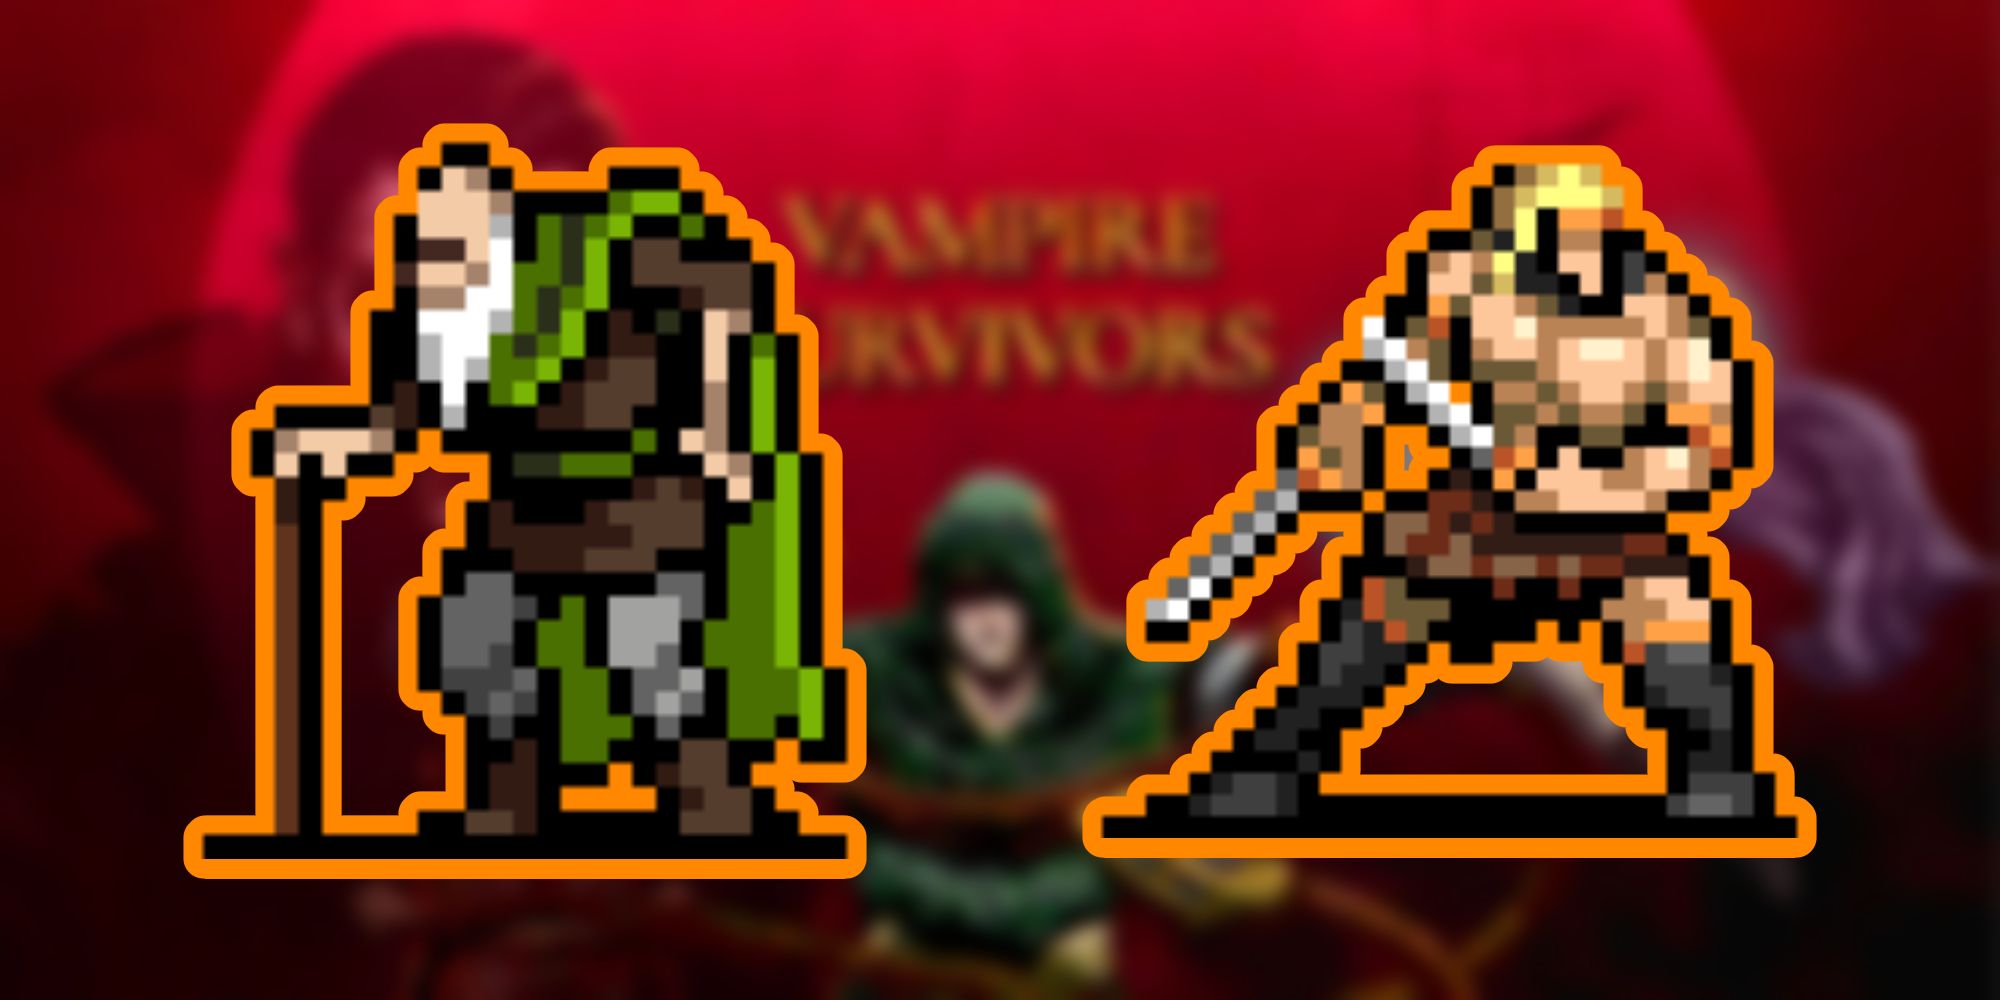 Sprites of Poe Ratcho and Gennaro Belpaese from Vampire Survivors